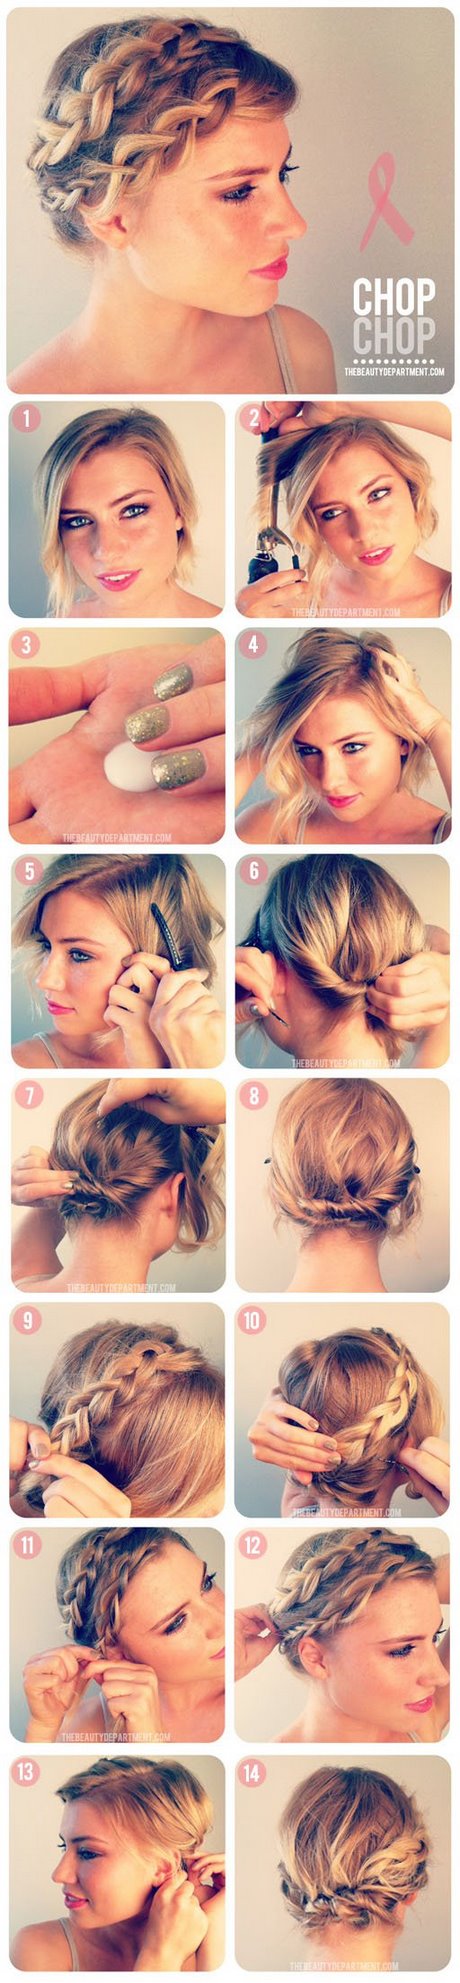 Easy hairstyles to do yourself for short hair easy-hairstyles-to-do-yourself-for-short-hair-74_10